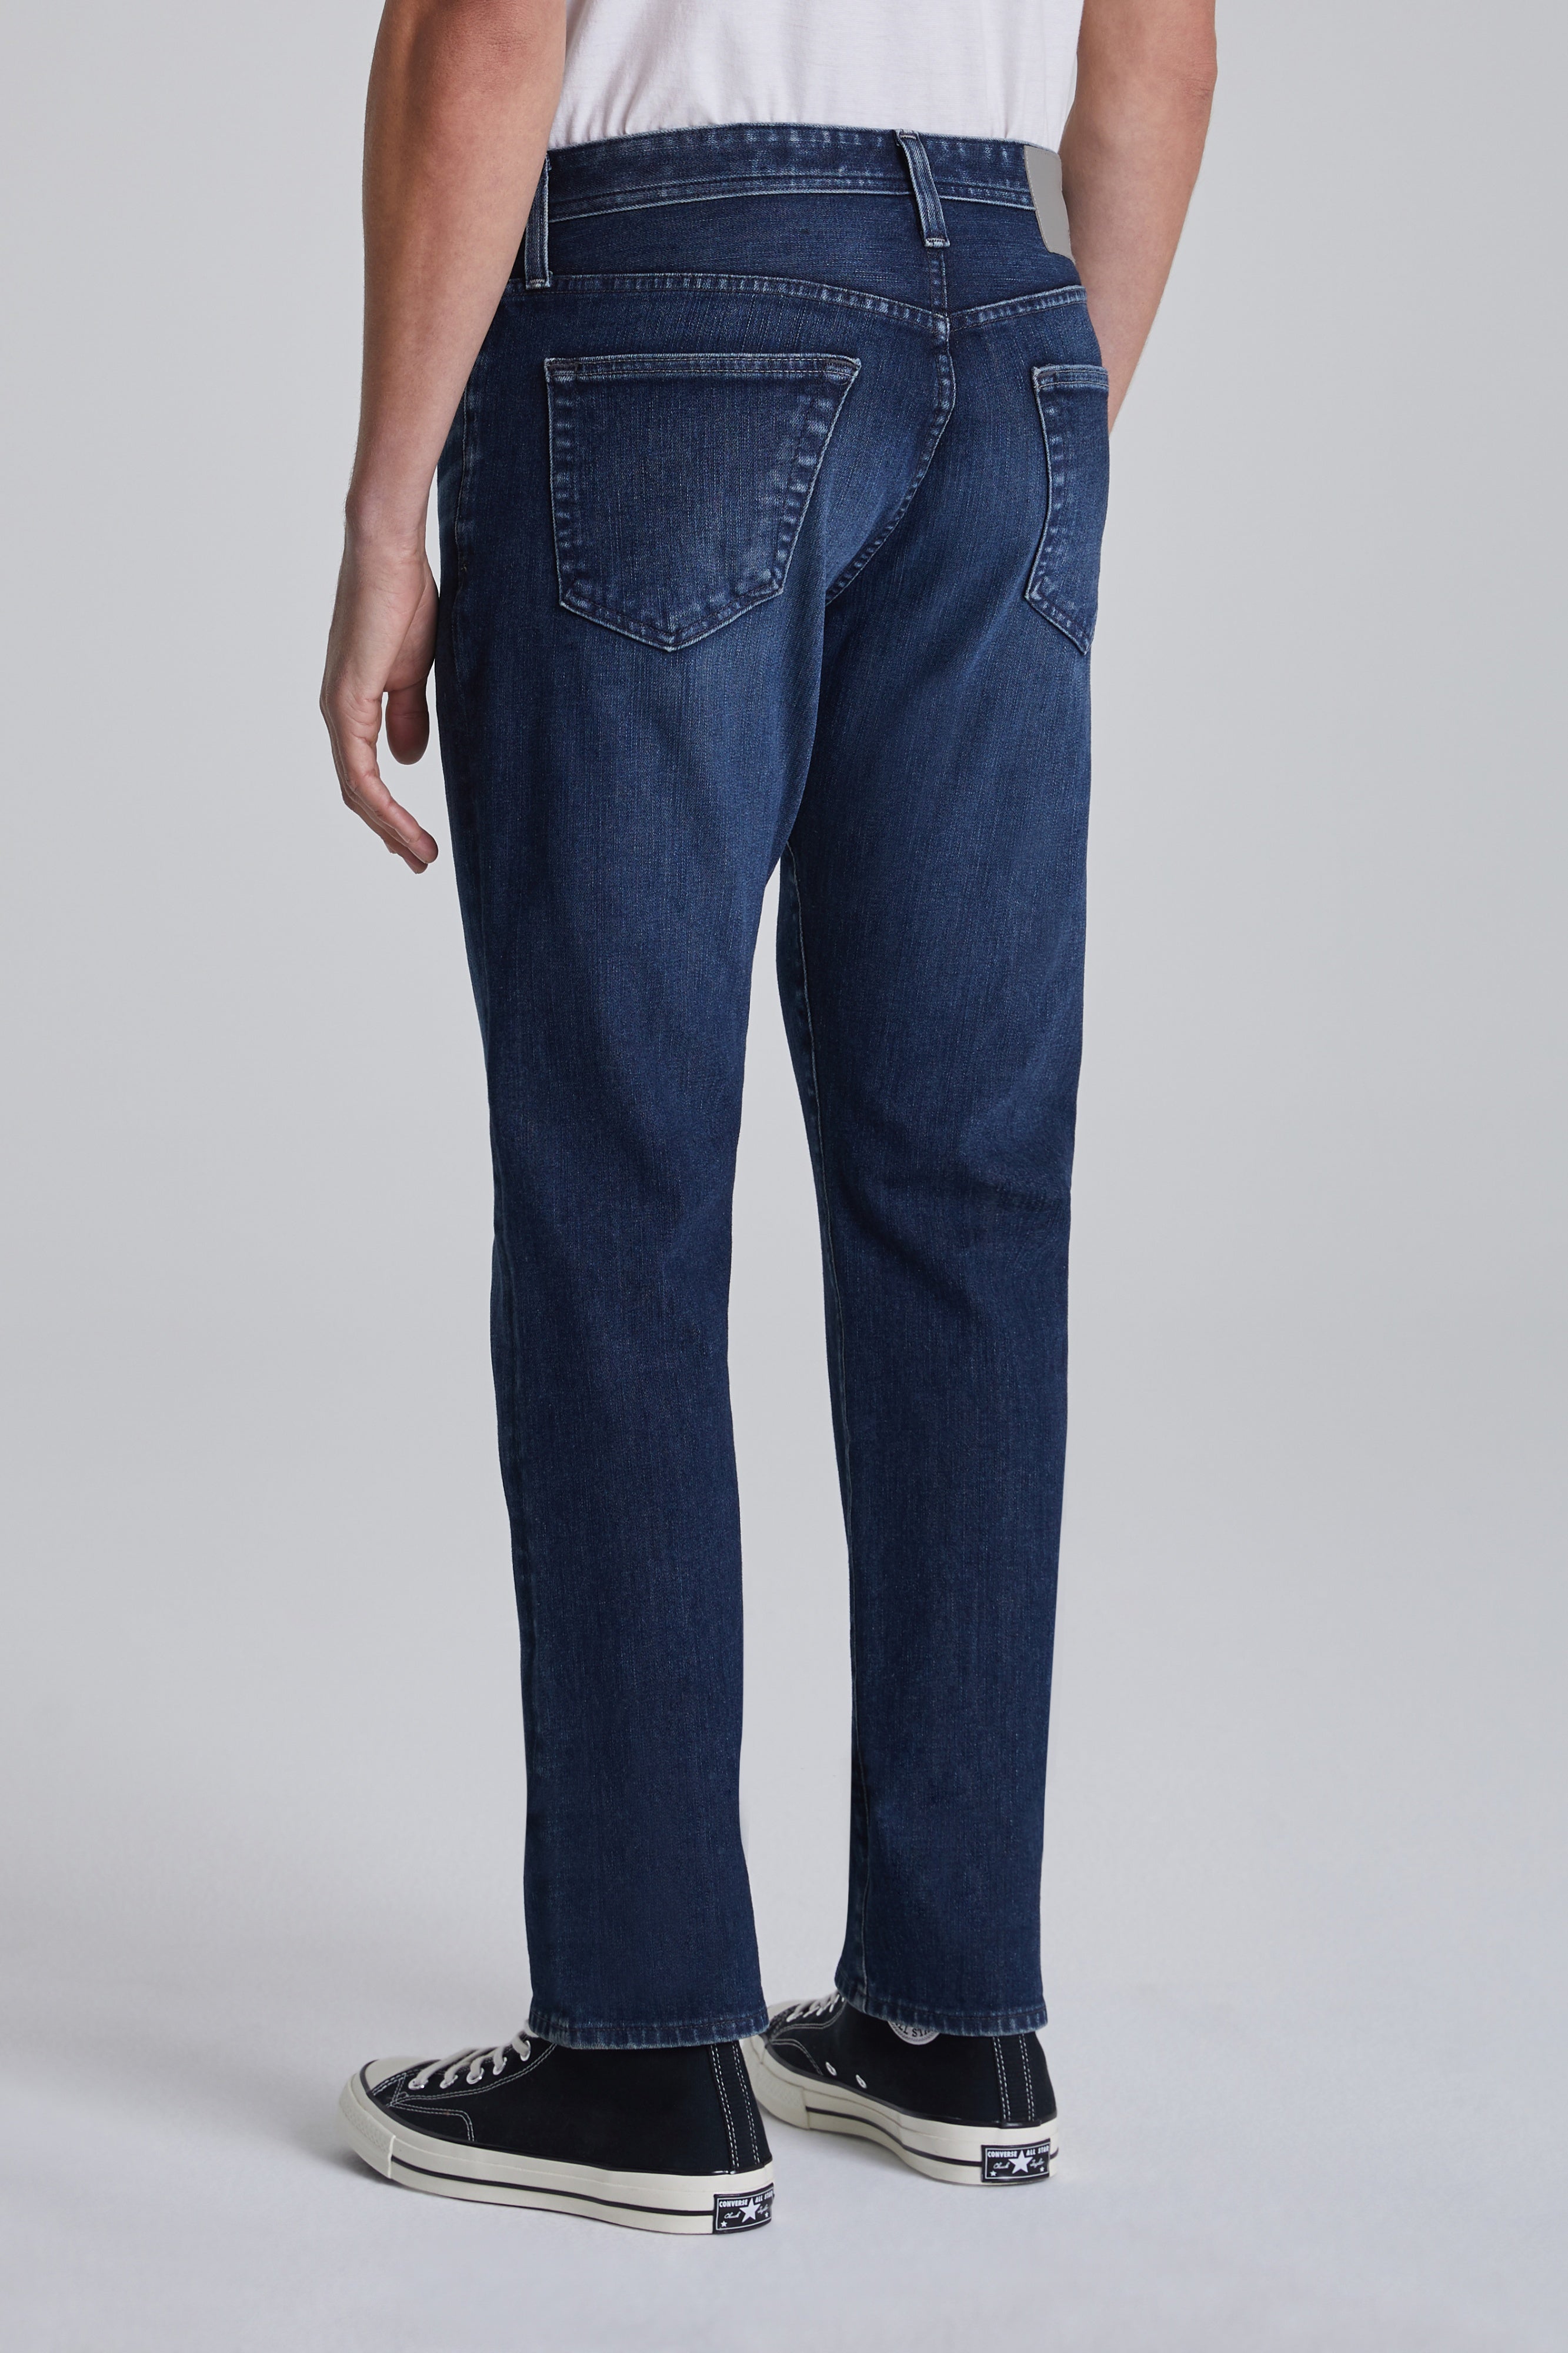 ag jeans dylan slim fit jean in midlands blue, rear view